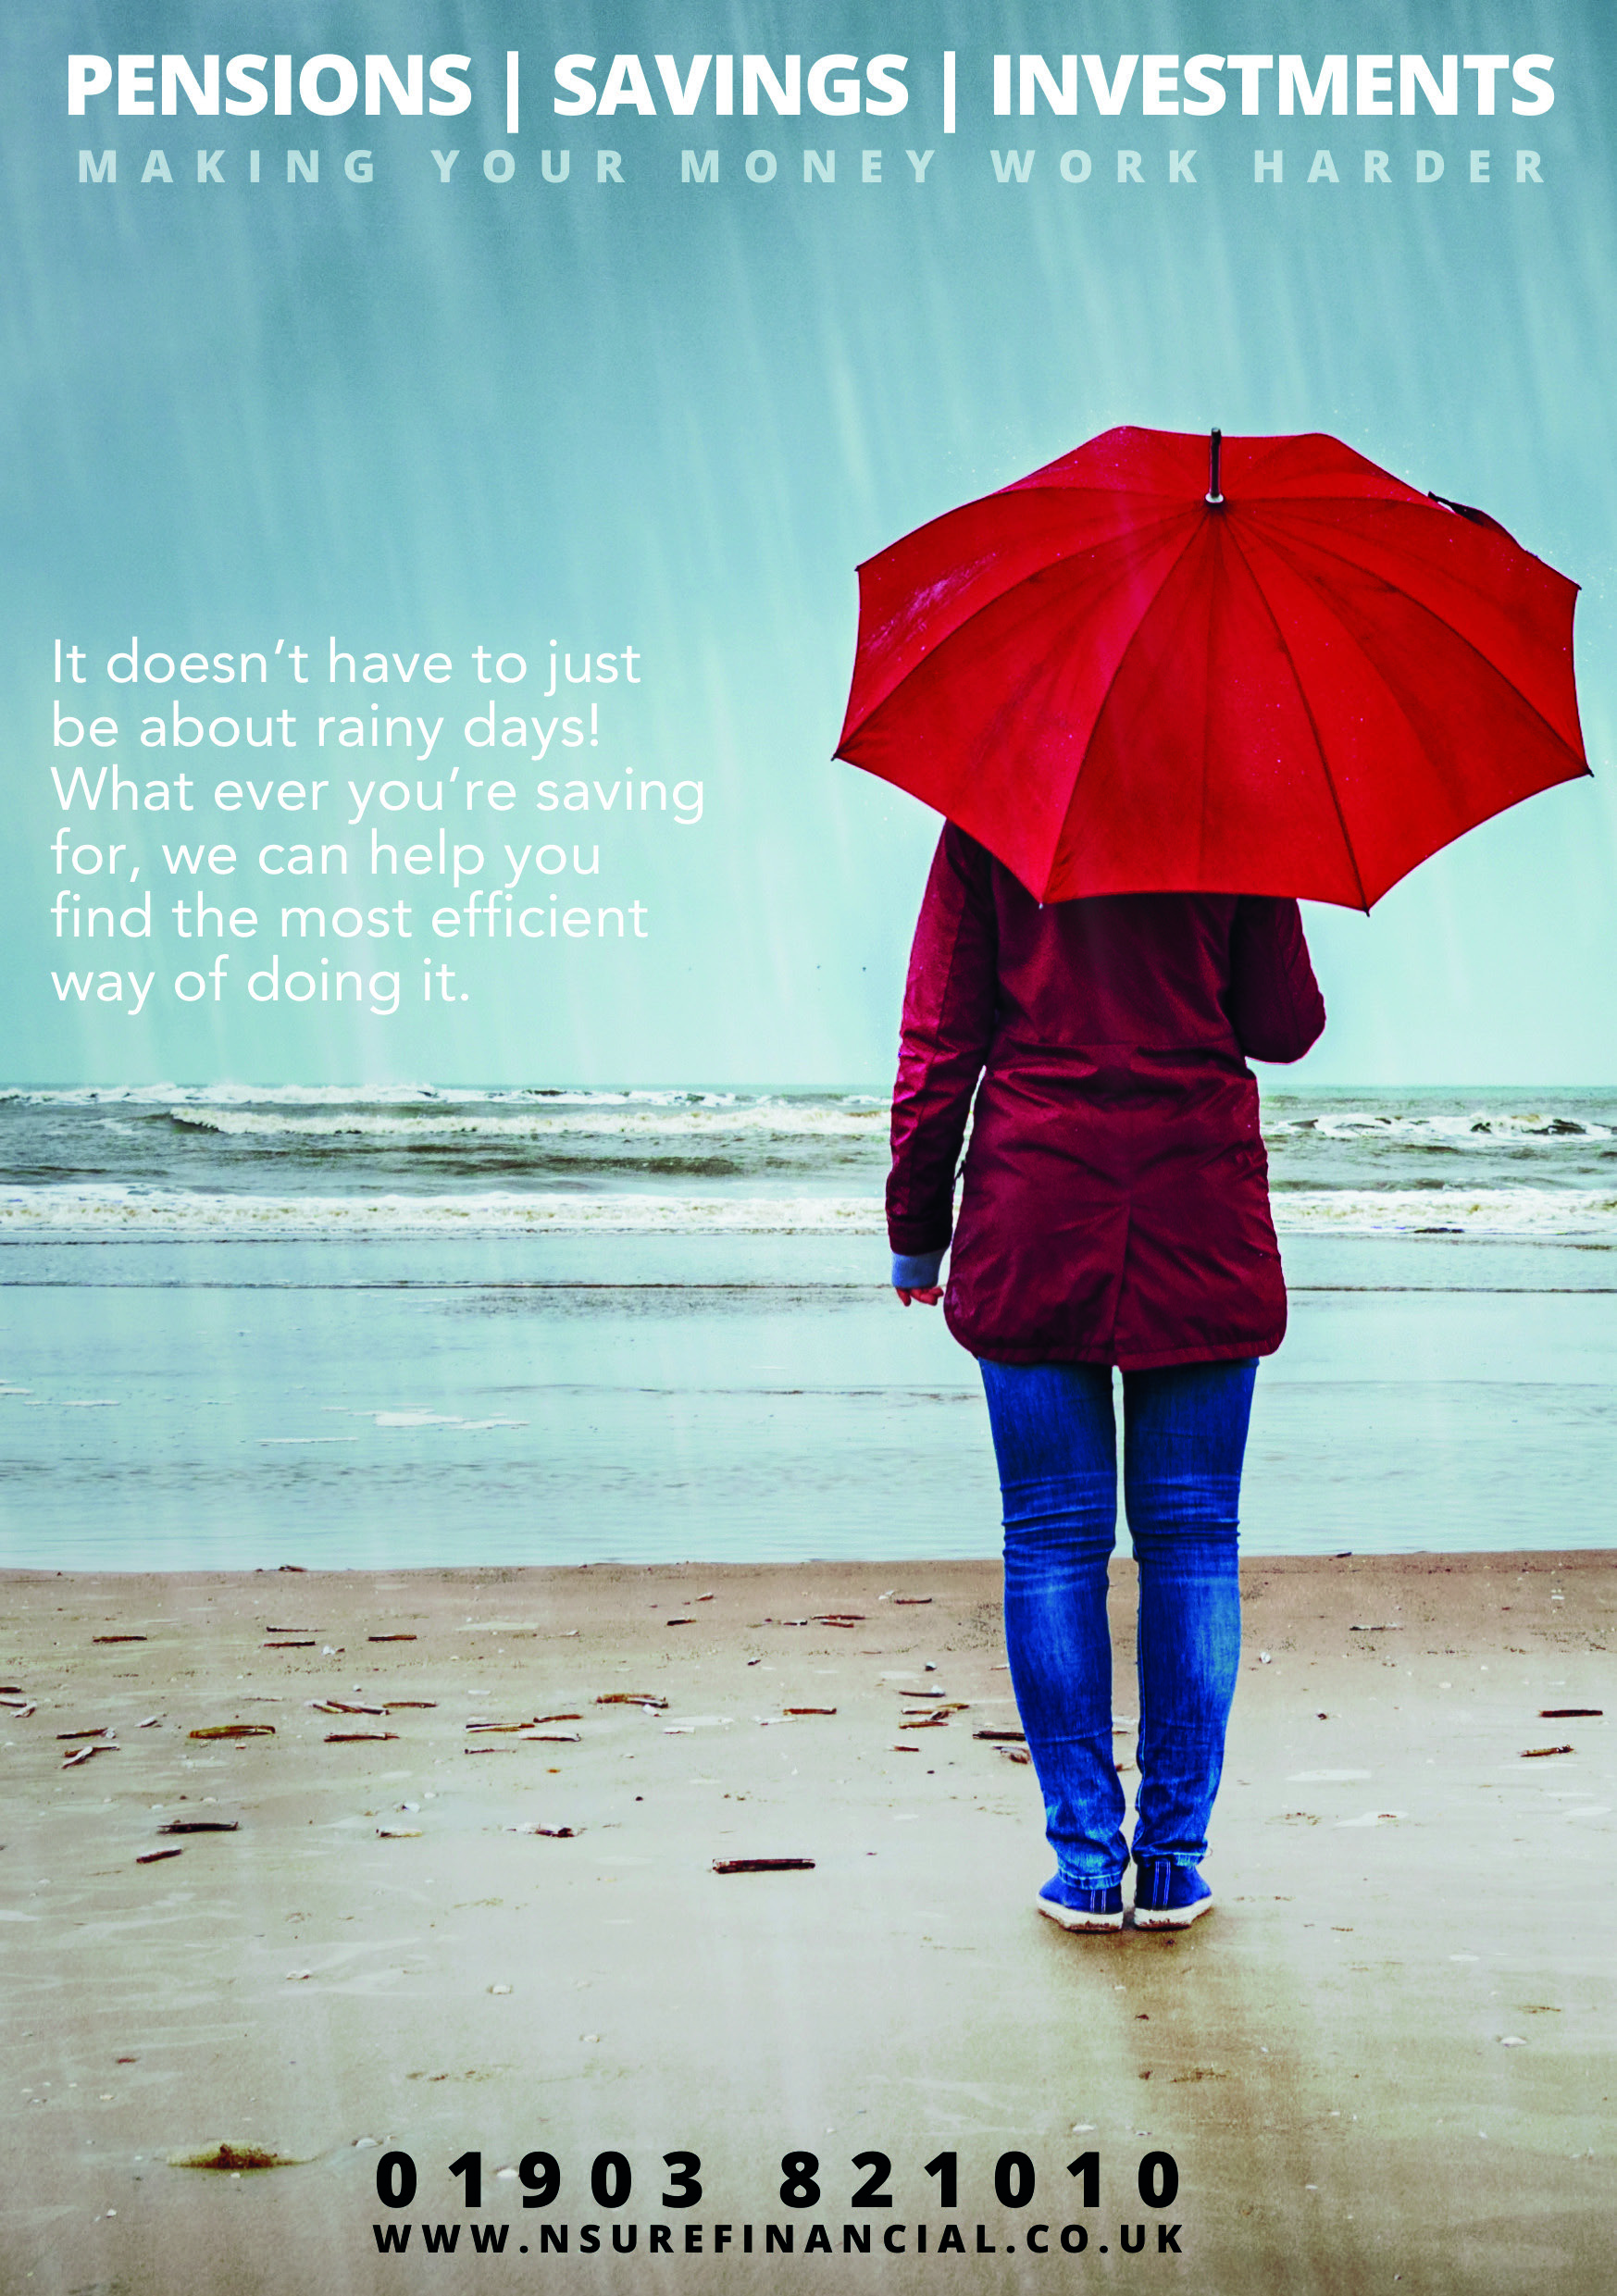 A person stands on a beach with an umbrella in the rain.  Text says it doesn't have to just be about rainy day savings